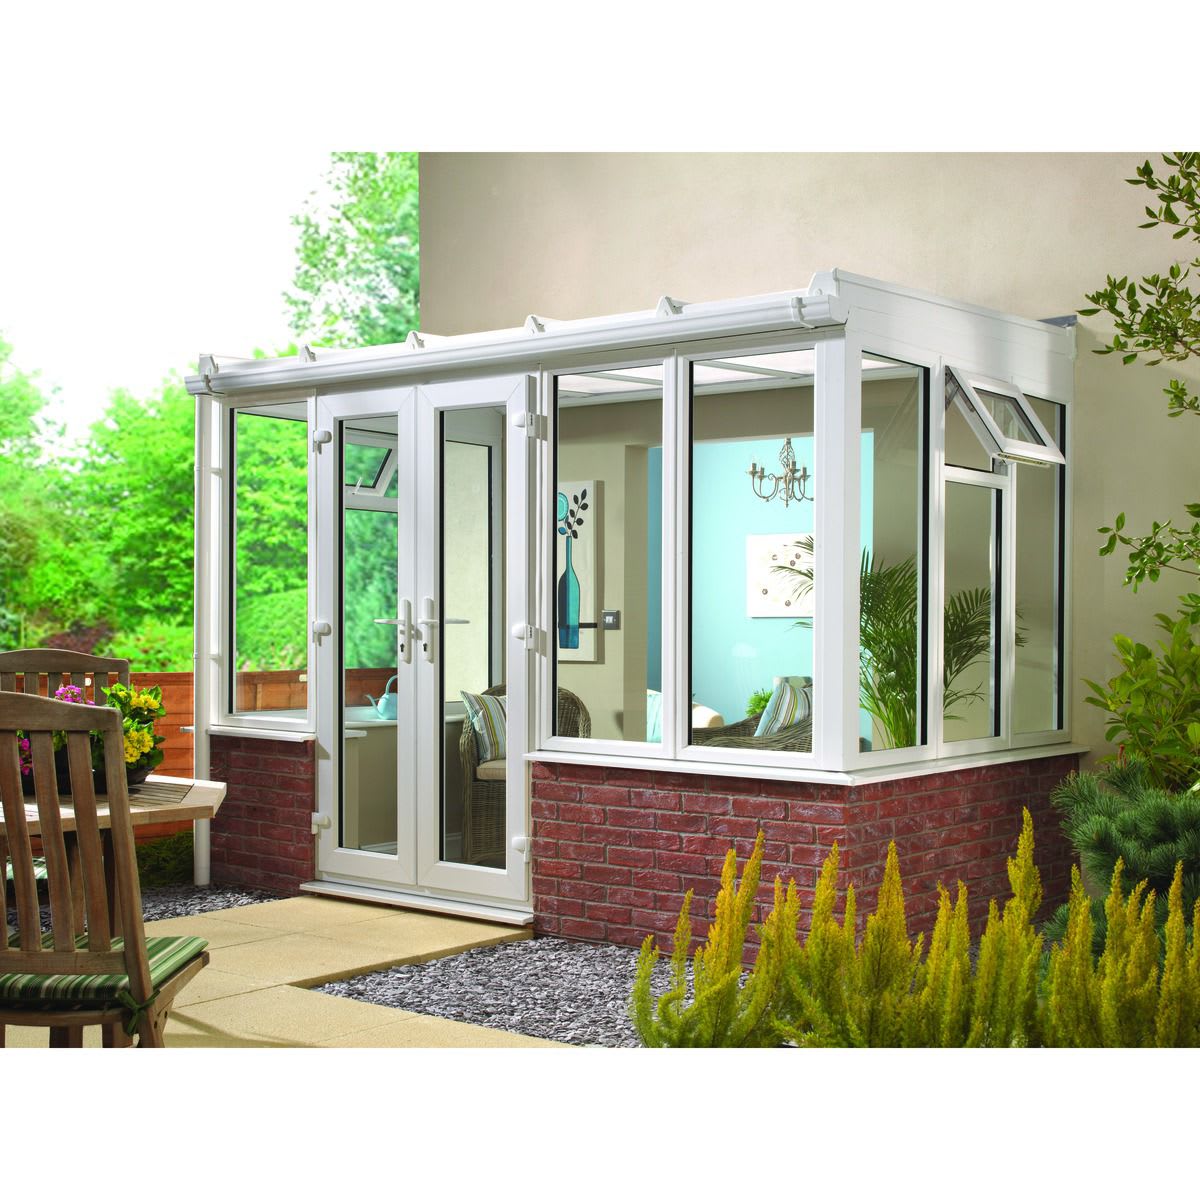 Wickes Lean To Dwarf Wall White Conservatory -